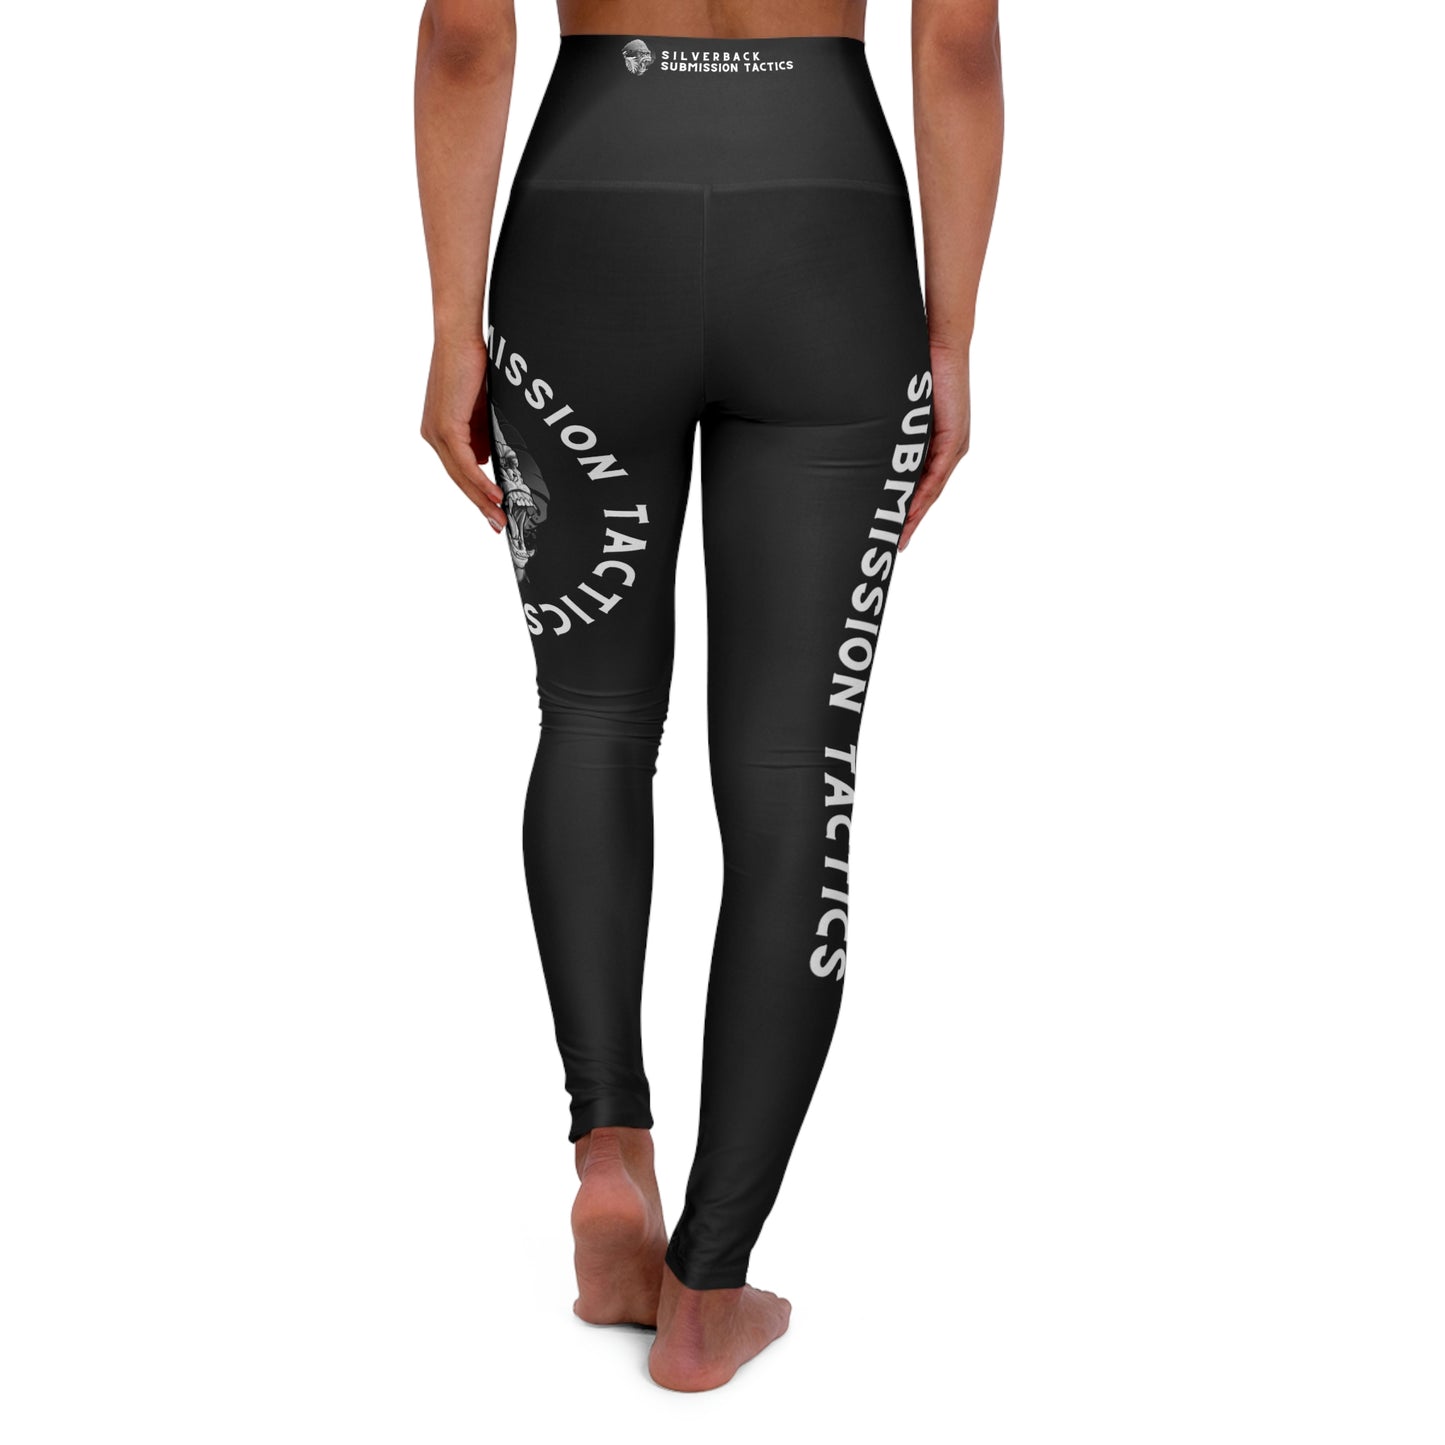 High Waisted Silverback Submission Tactics Yoga Leggings